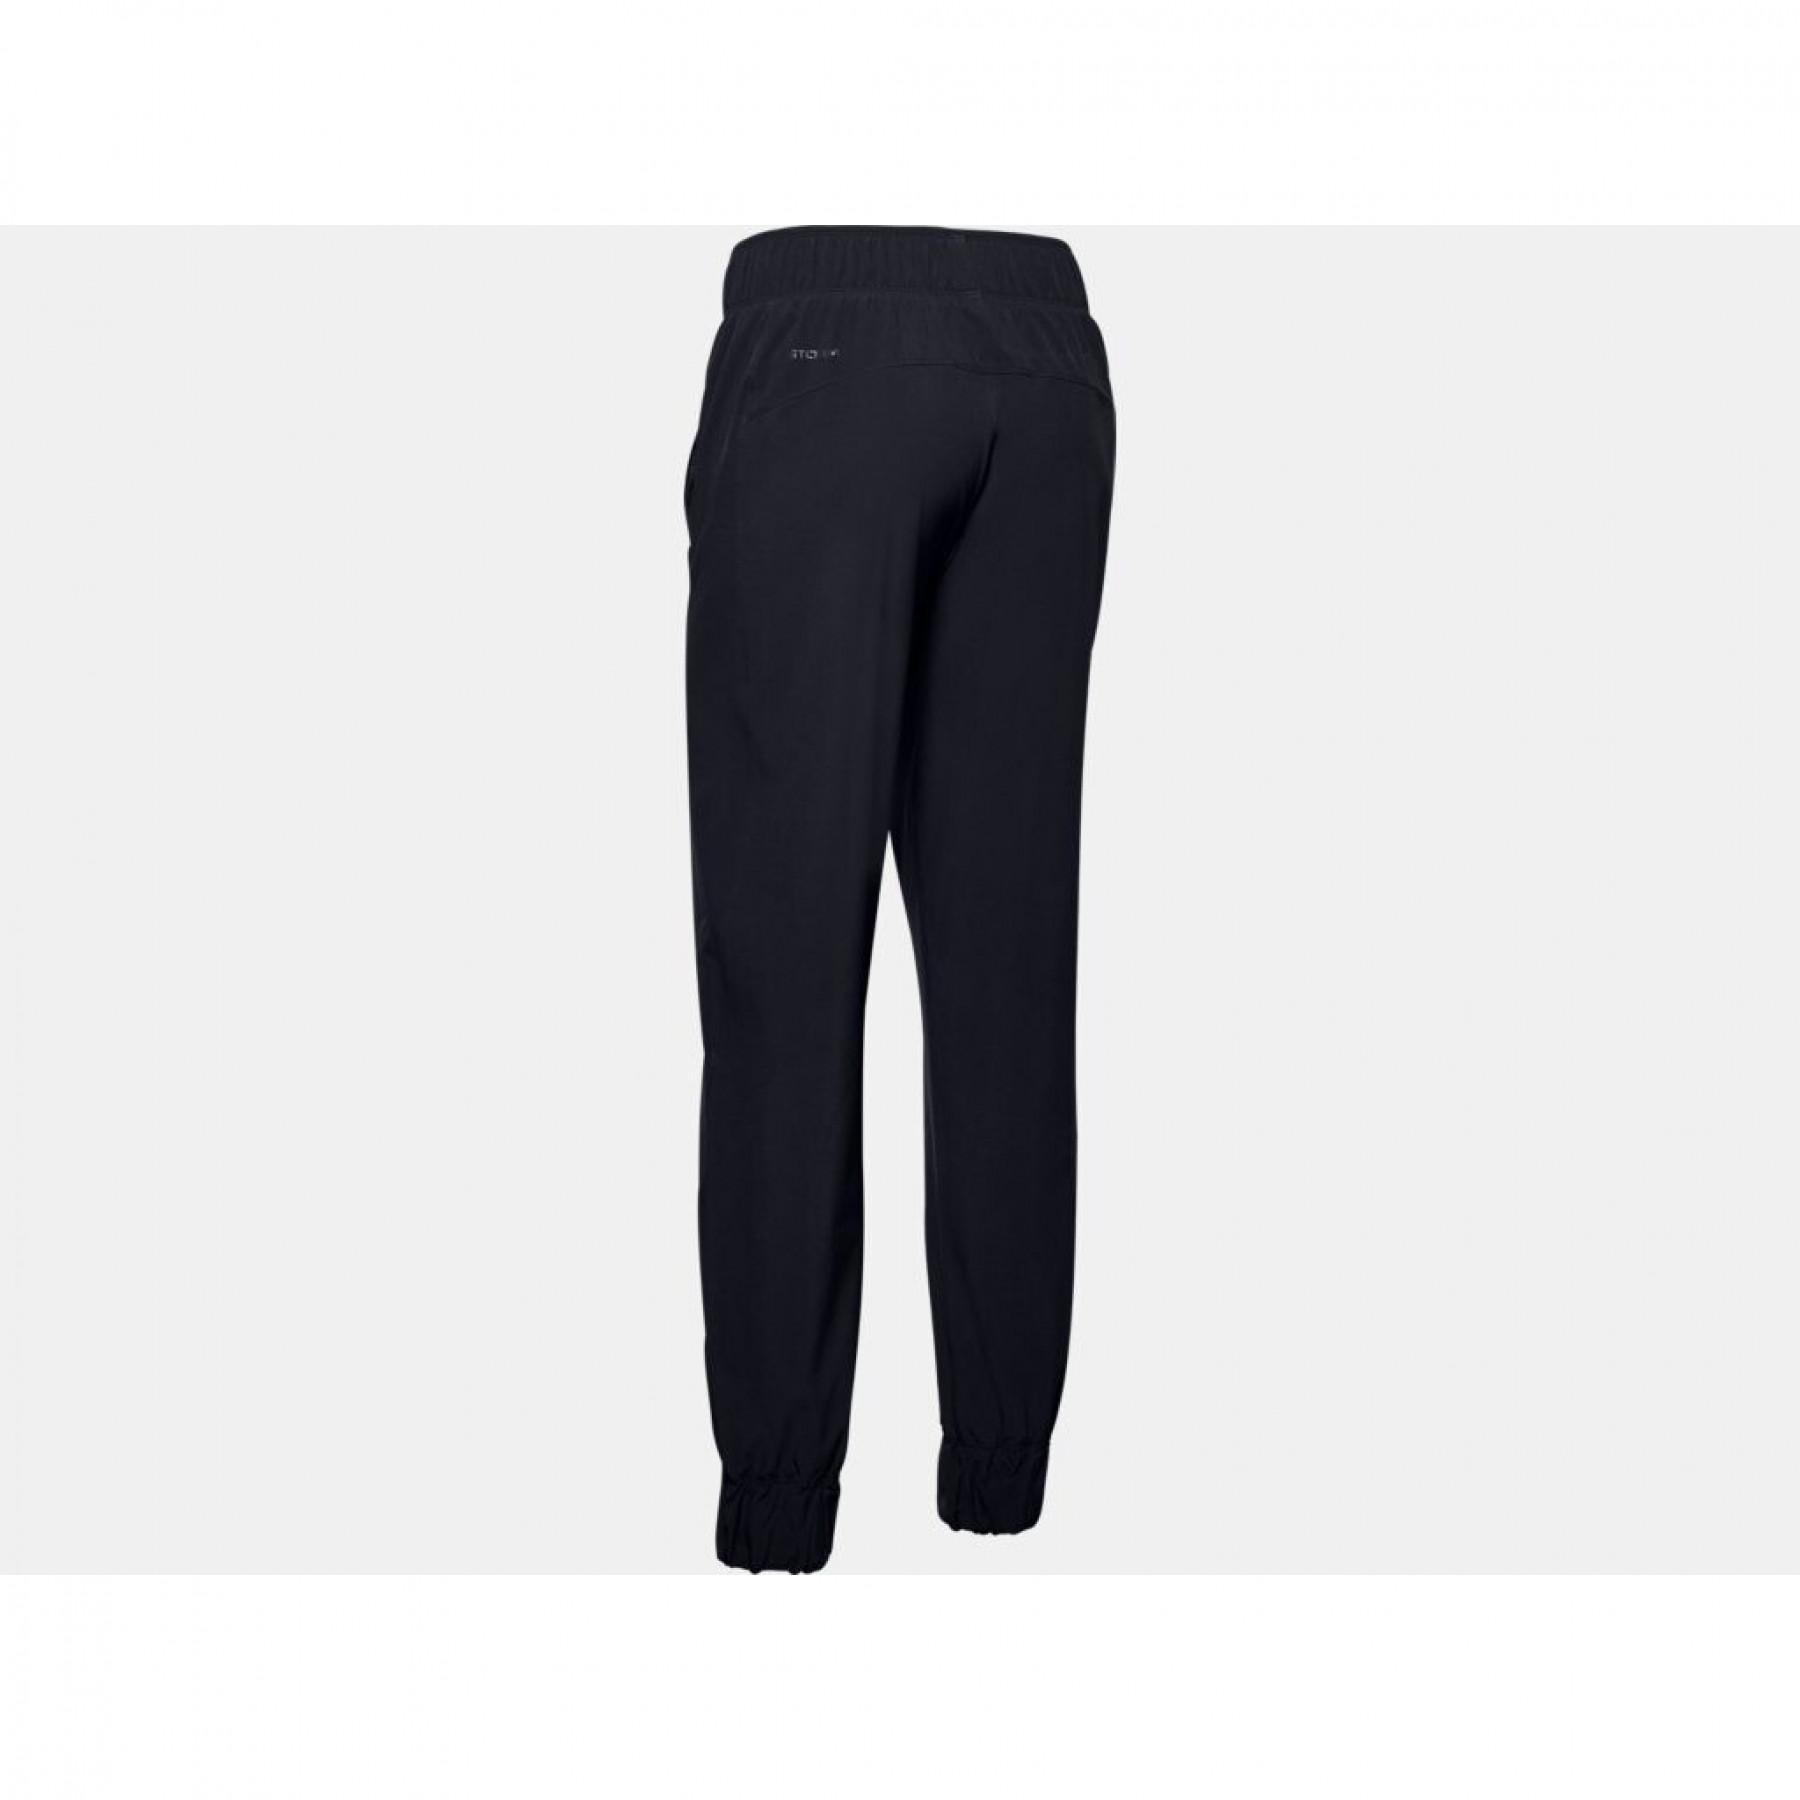 Pantalones de mujer Under Armour Woven Branded